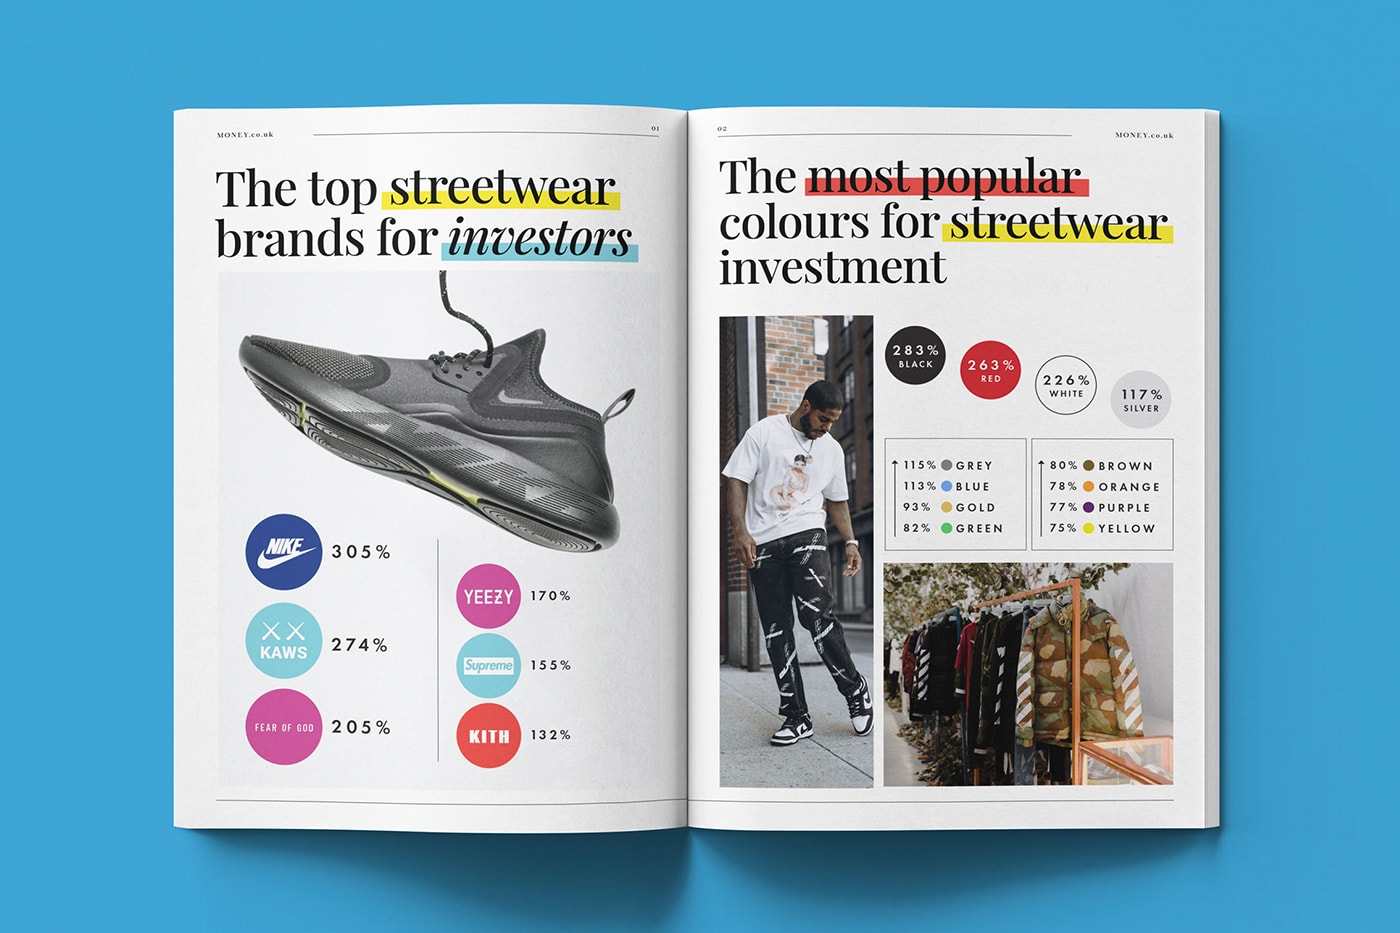 Top Streetwear Fashion Brands Sneakers Shoes Colors Investment Highest Resale Value Study StockX Nike Jordan Brand Kaws FOG